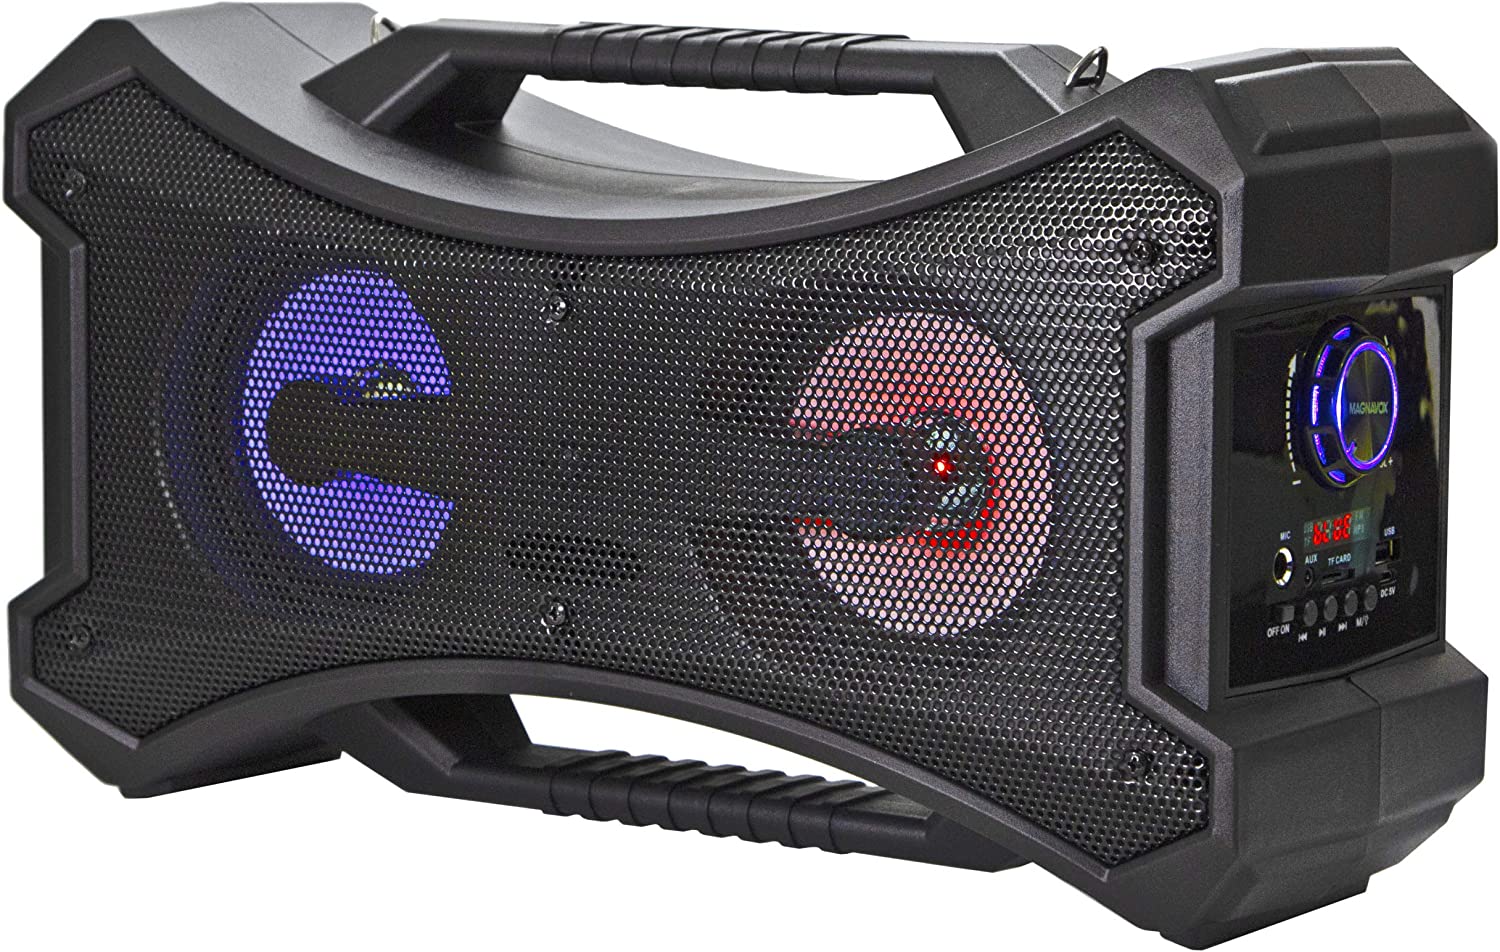 ''Magnavox MMA3834 Portable Stereo SPEAKER with FM Radio, Color Changing Lights, and Bluetooth Wirele